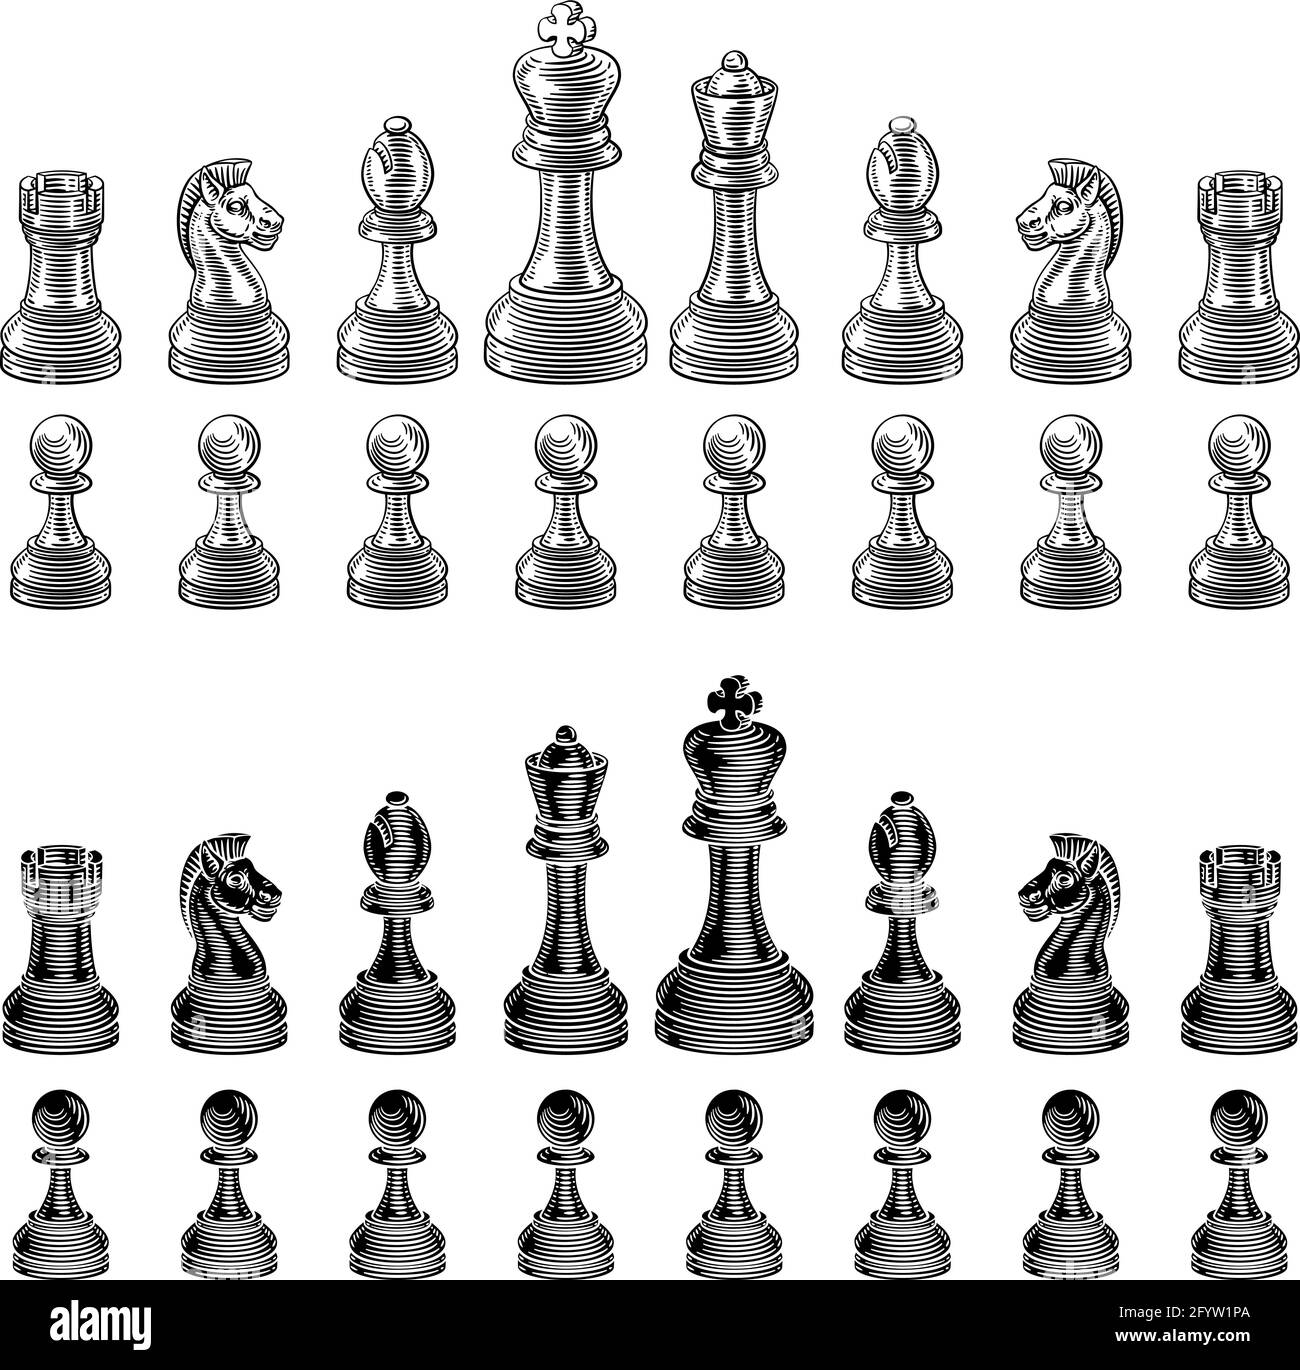 Chess Pieces Set Vintage Woodcut Style Stock Vector